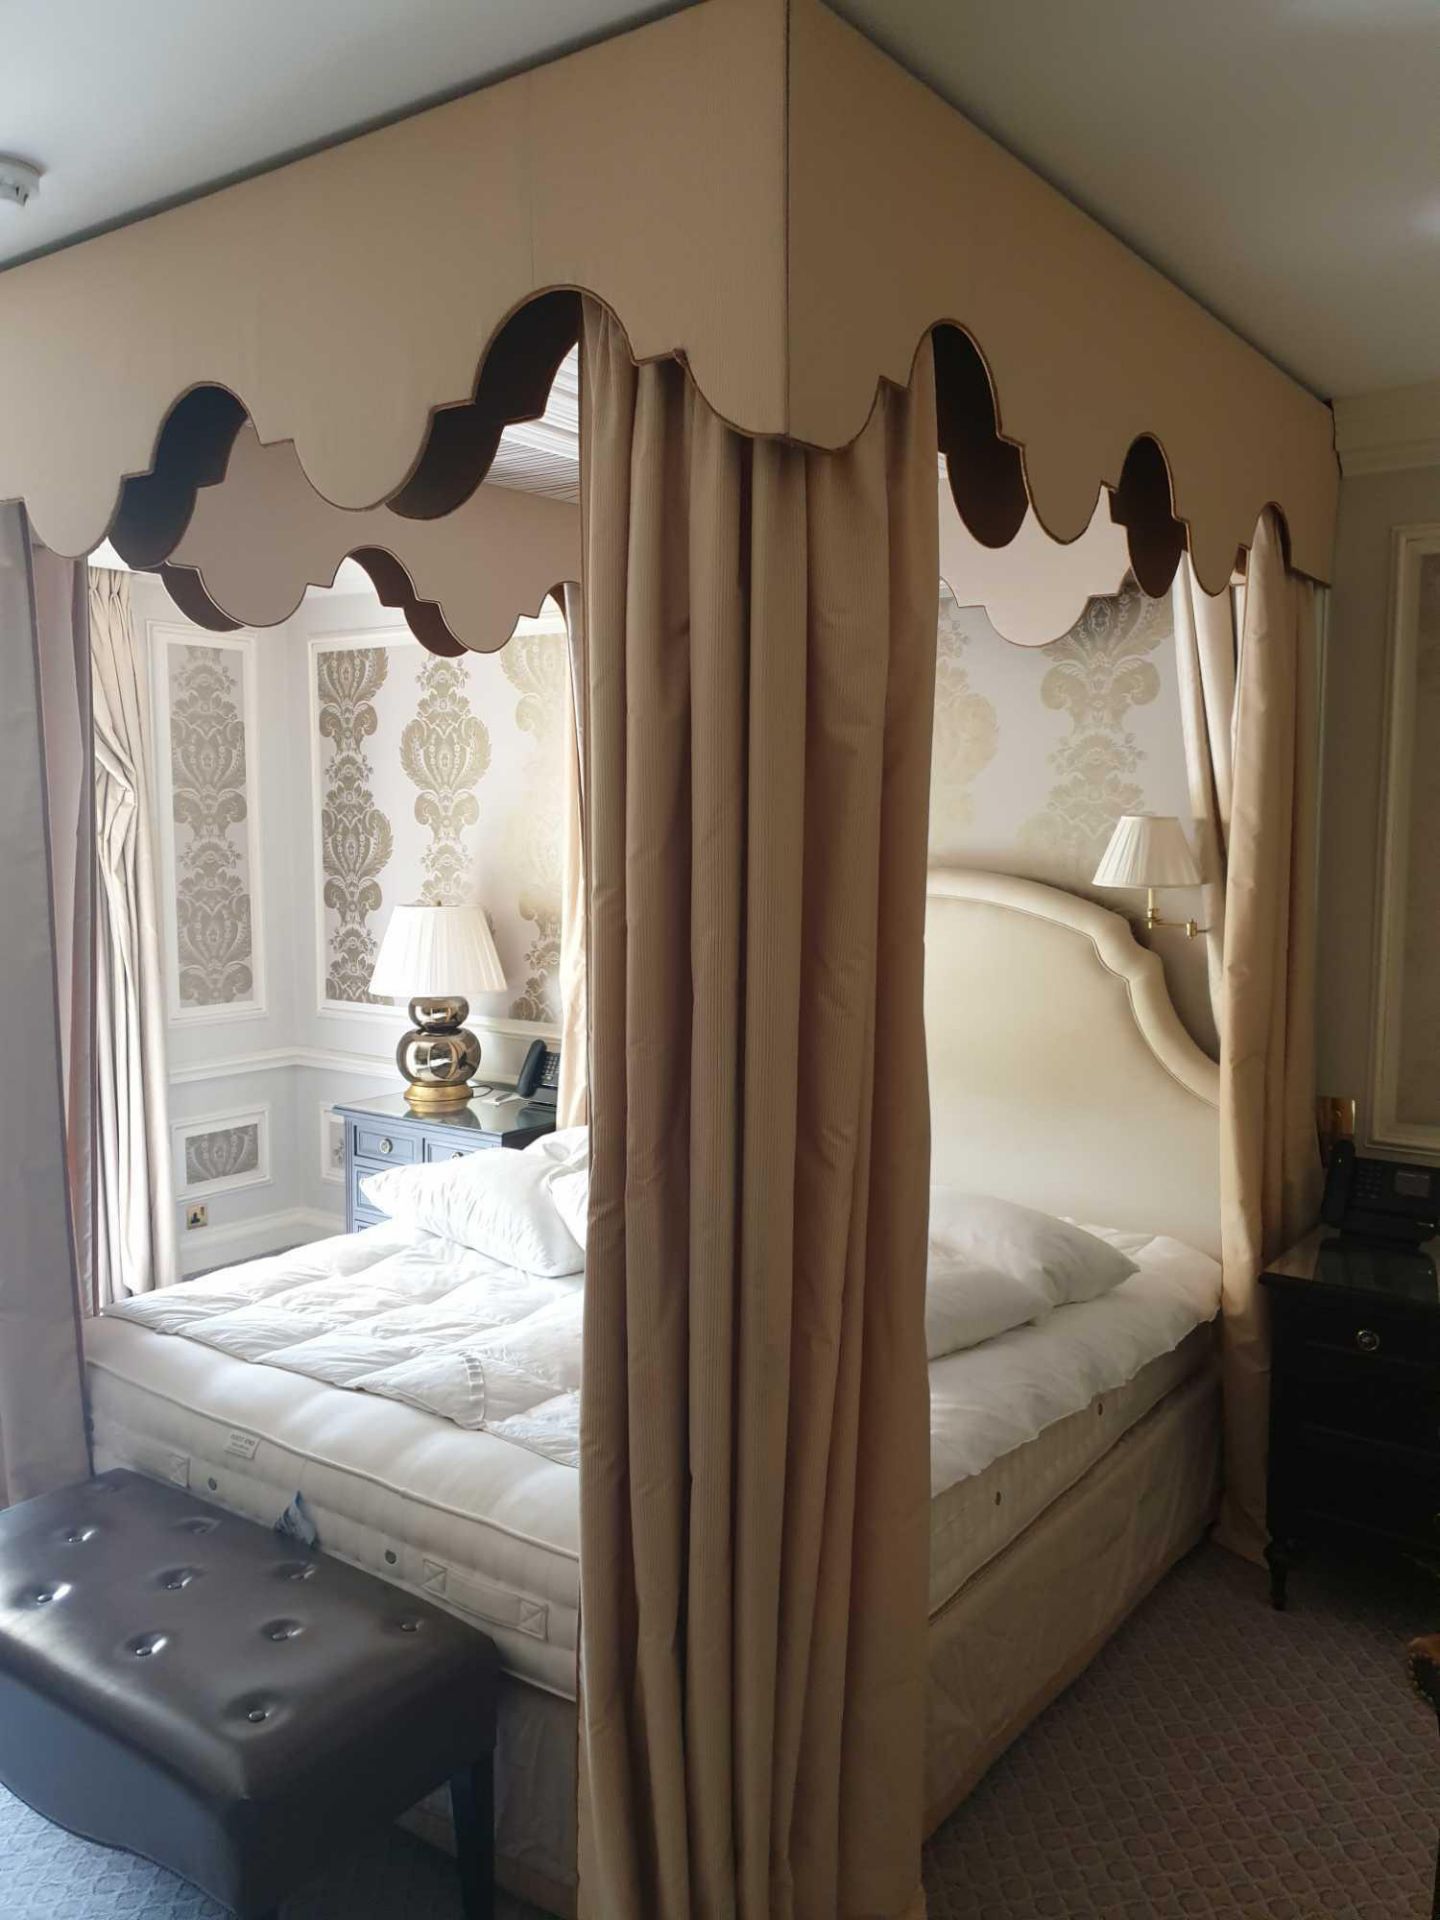 Bed Canopy Cream And Brown Floating Pelmet And Cream Headboard Silk Curtains Fully Lined Outer - Image 5 of 5